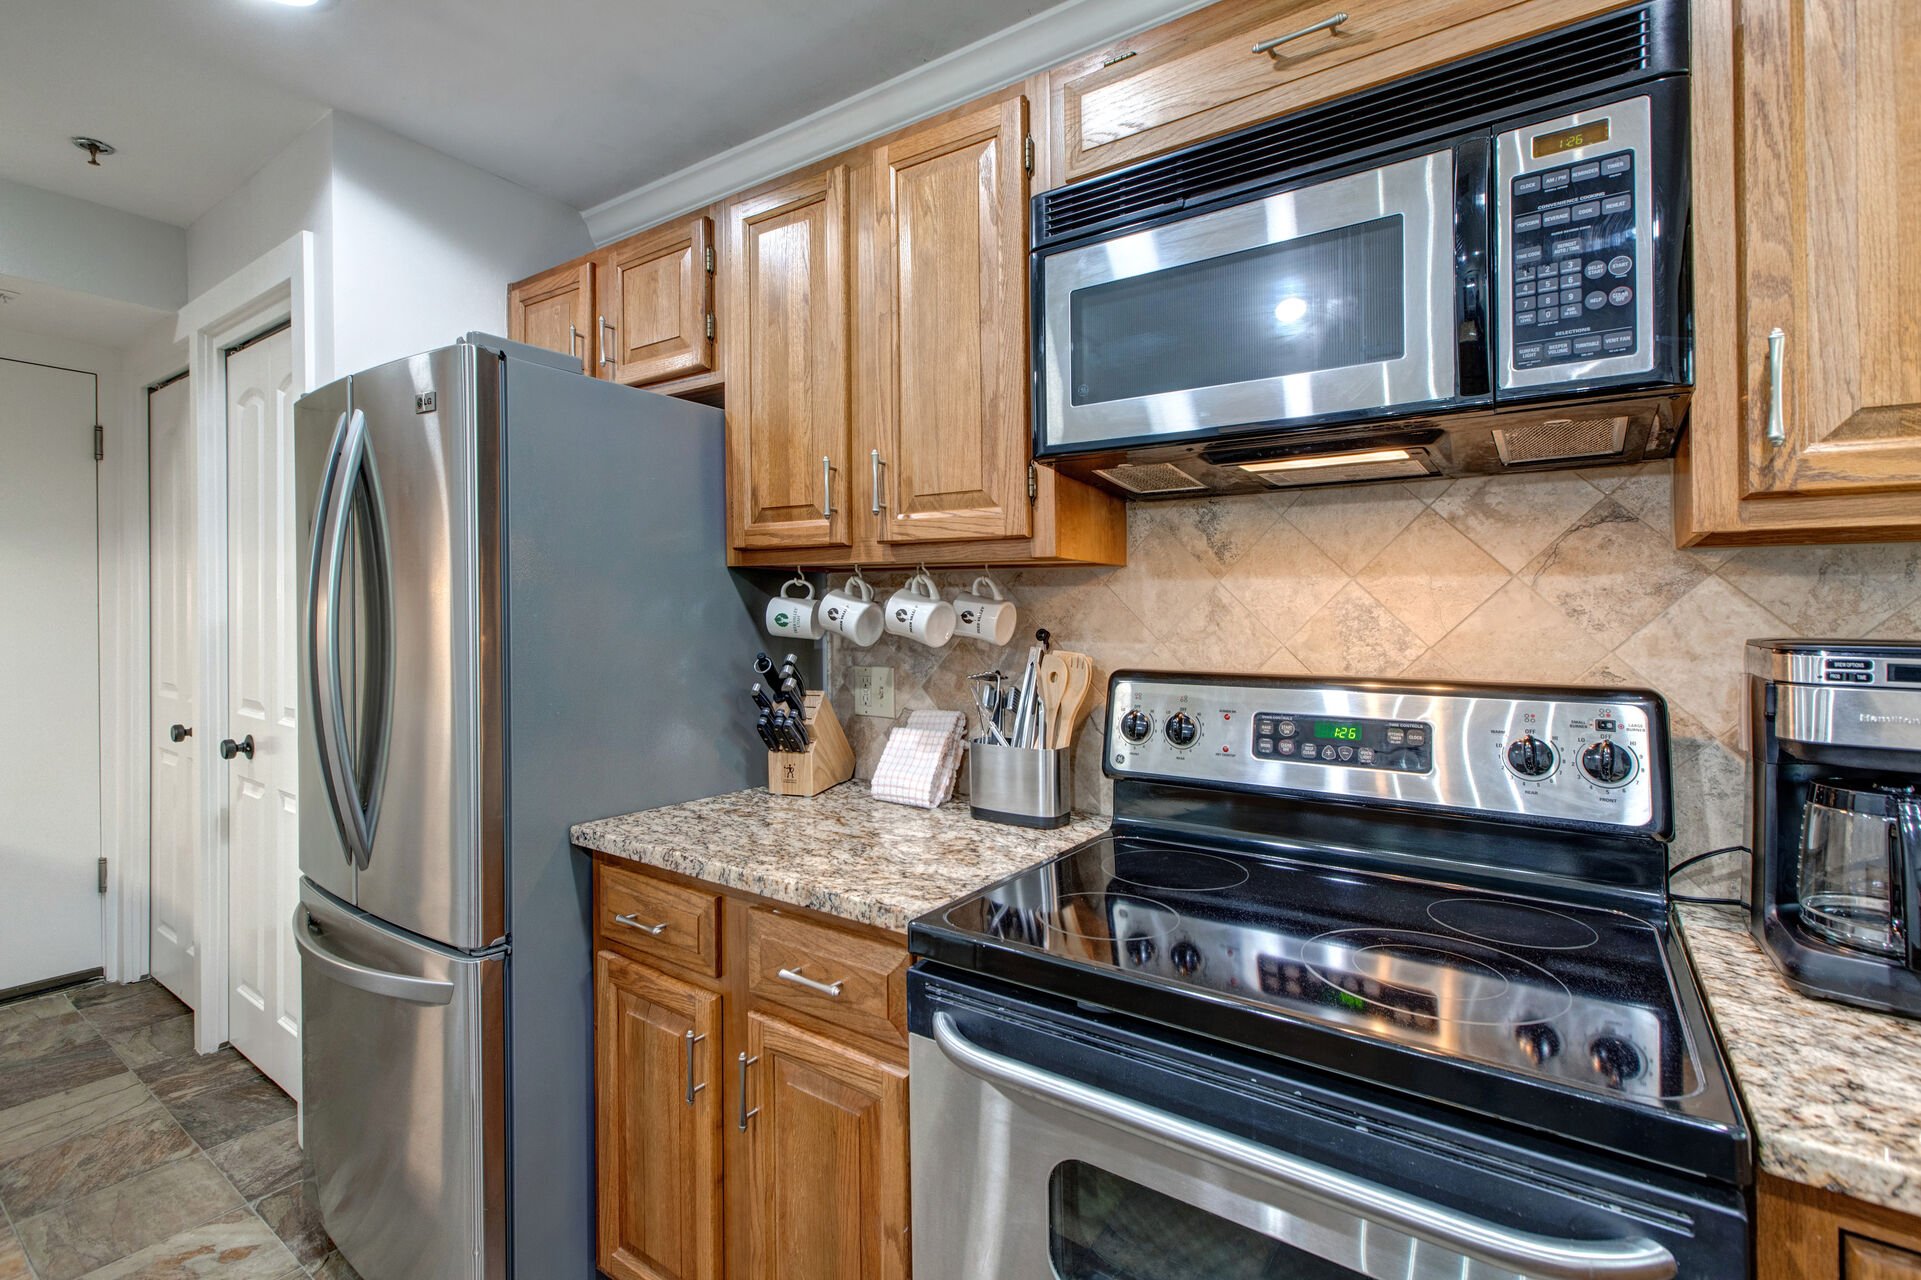 Kitchen with stone countertops, stainless steel appliances, bar seating for four, and garage and laundry room access